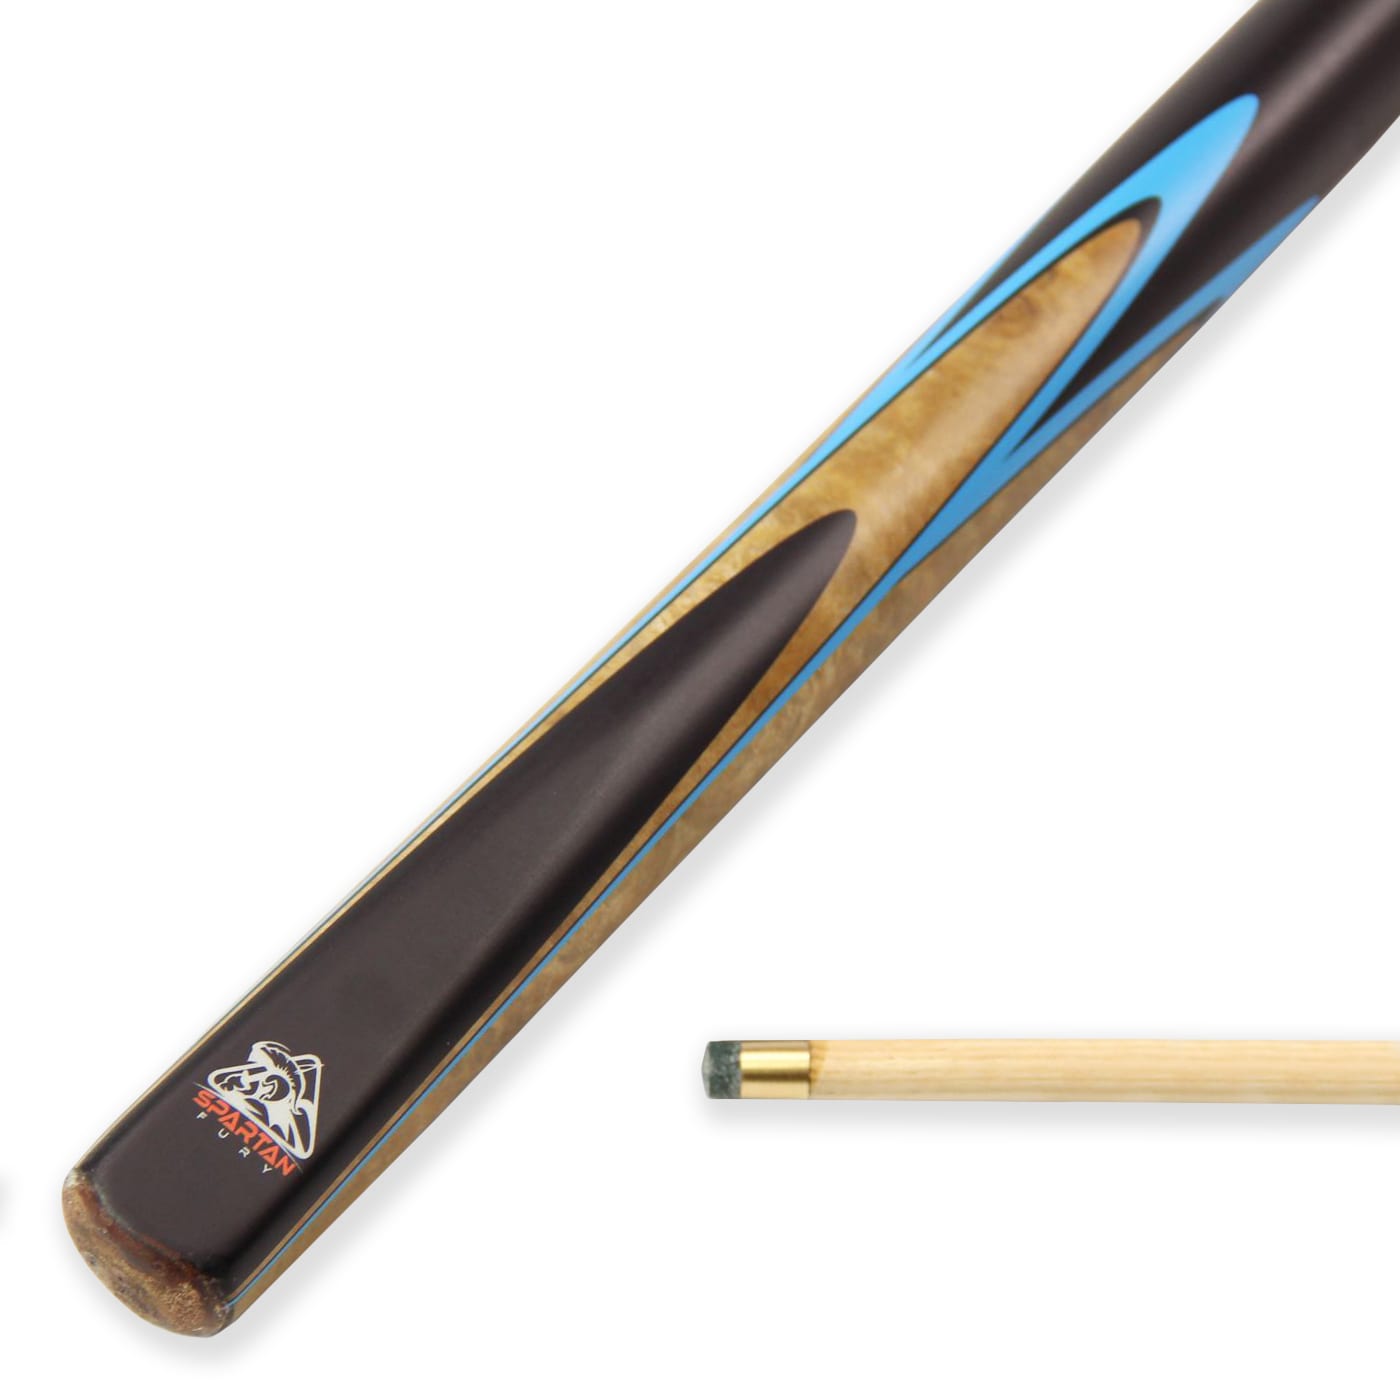 Spartan Fury BLUE CONQUEST 2pc Matching Ash Centre Joint Snooker Cue 9.5mm Tip 